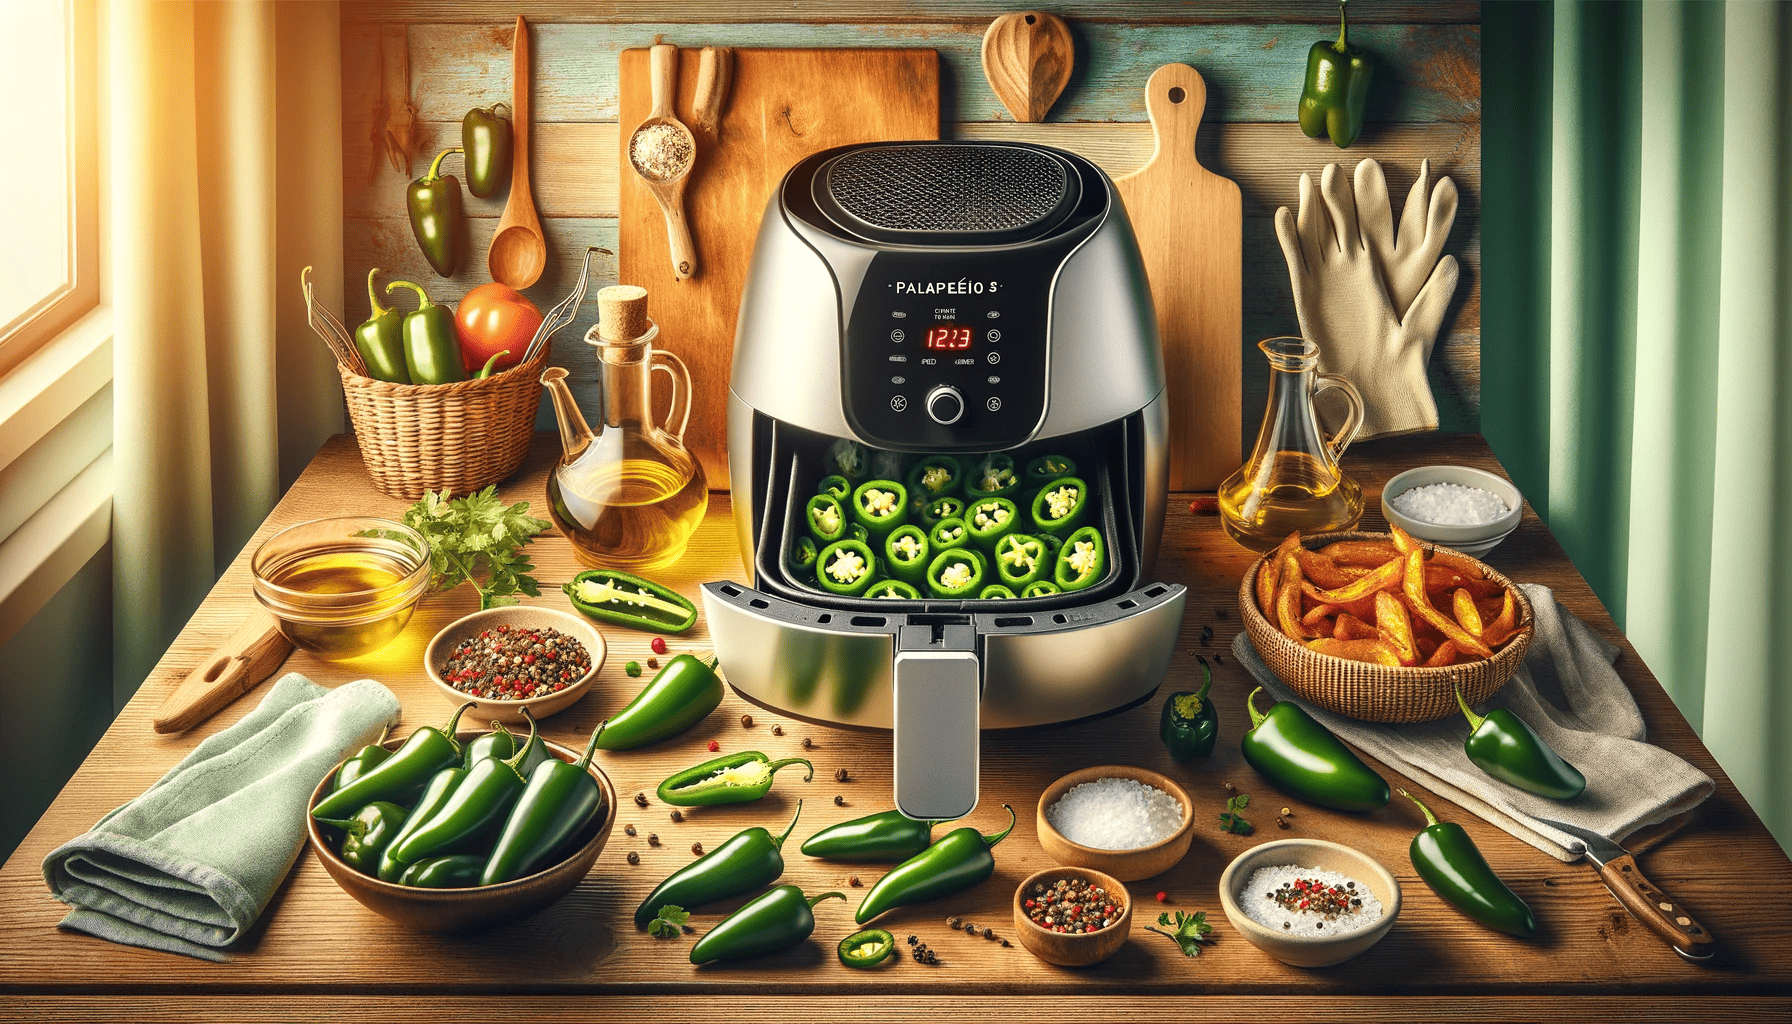 How to Roast Jalapenos in Air Fryer